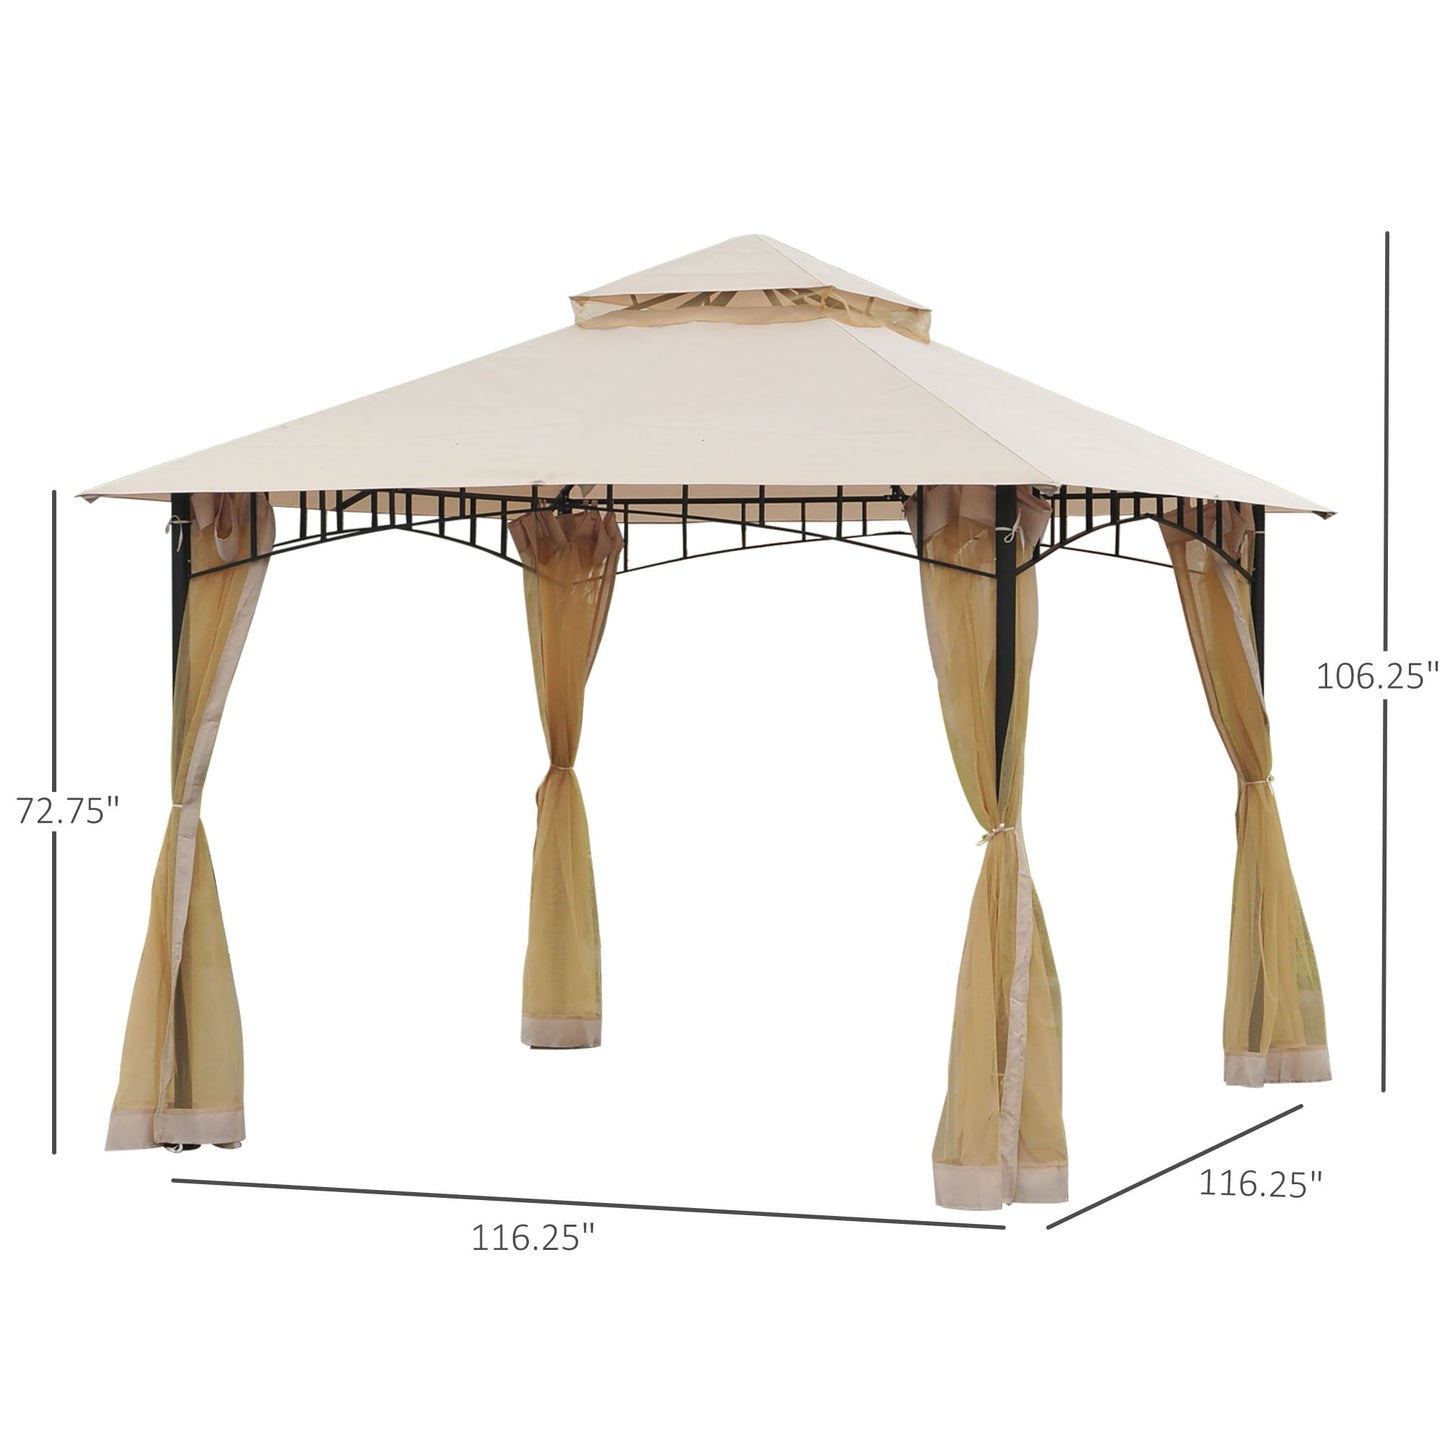 Outdoor and Garden-10'x10' Outdoor Patio Gazebo Canopy Metal Canopy Tent with 2-Tier Roof and Mesh Netting for Backyard, Beige - Outdoor Style Company